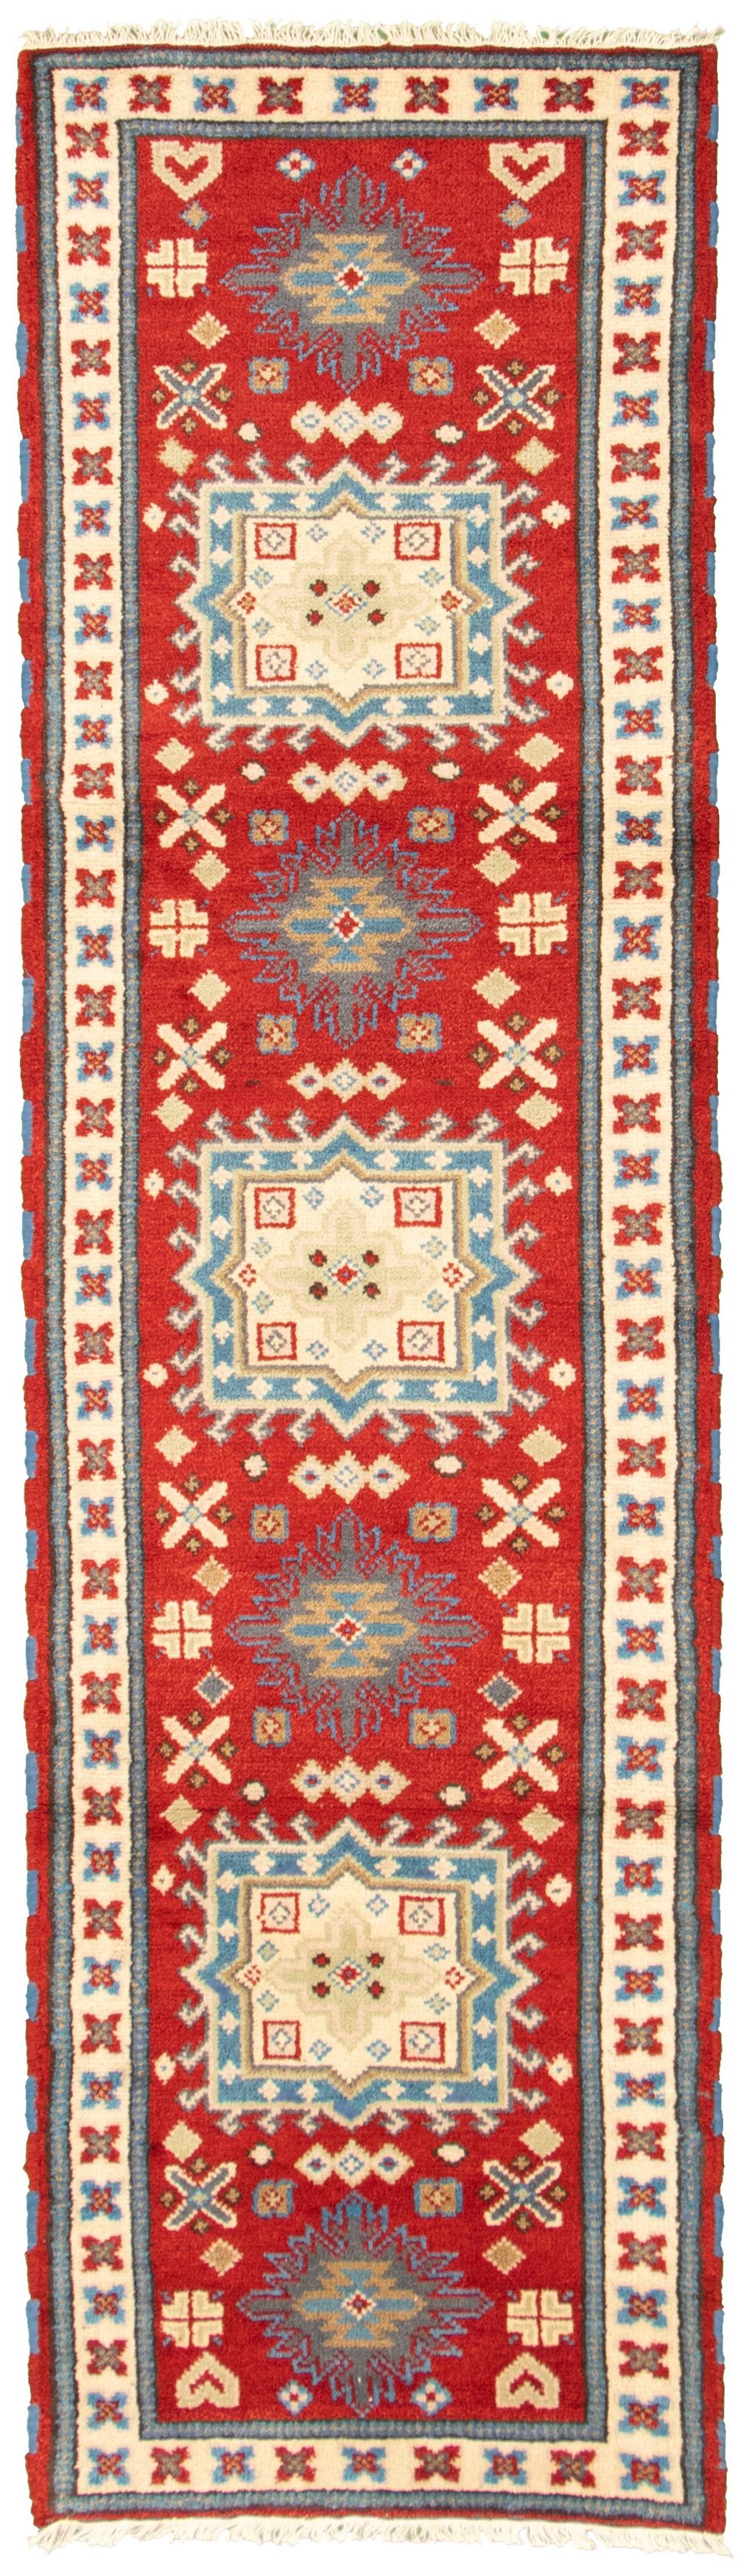 Hand-knotted Royal Kazak Red Wool Rug 2'8" x 10'1" Size: 2'8" x 10'1"  